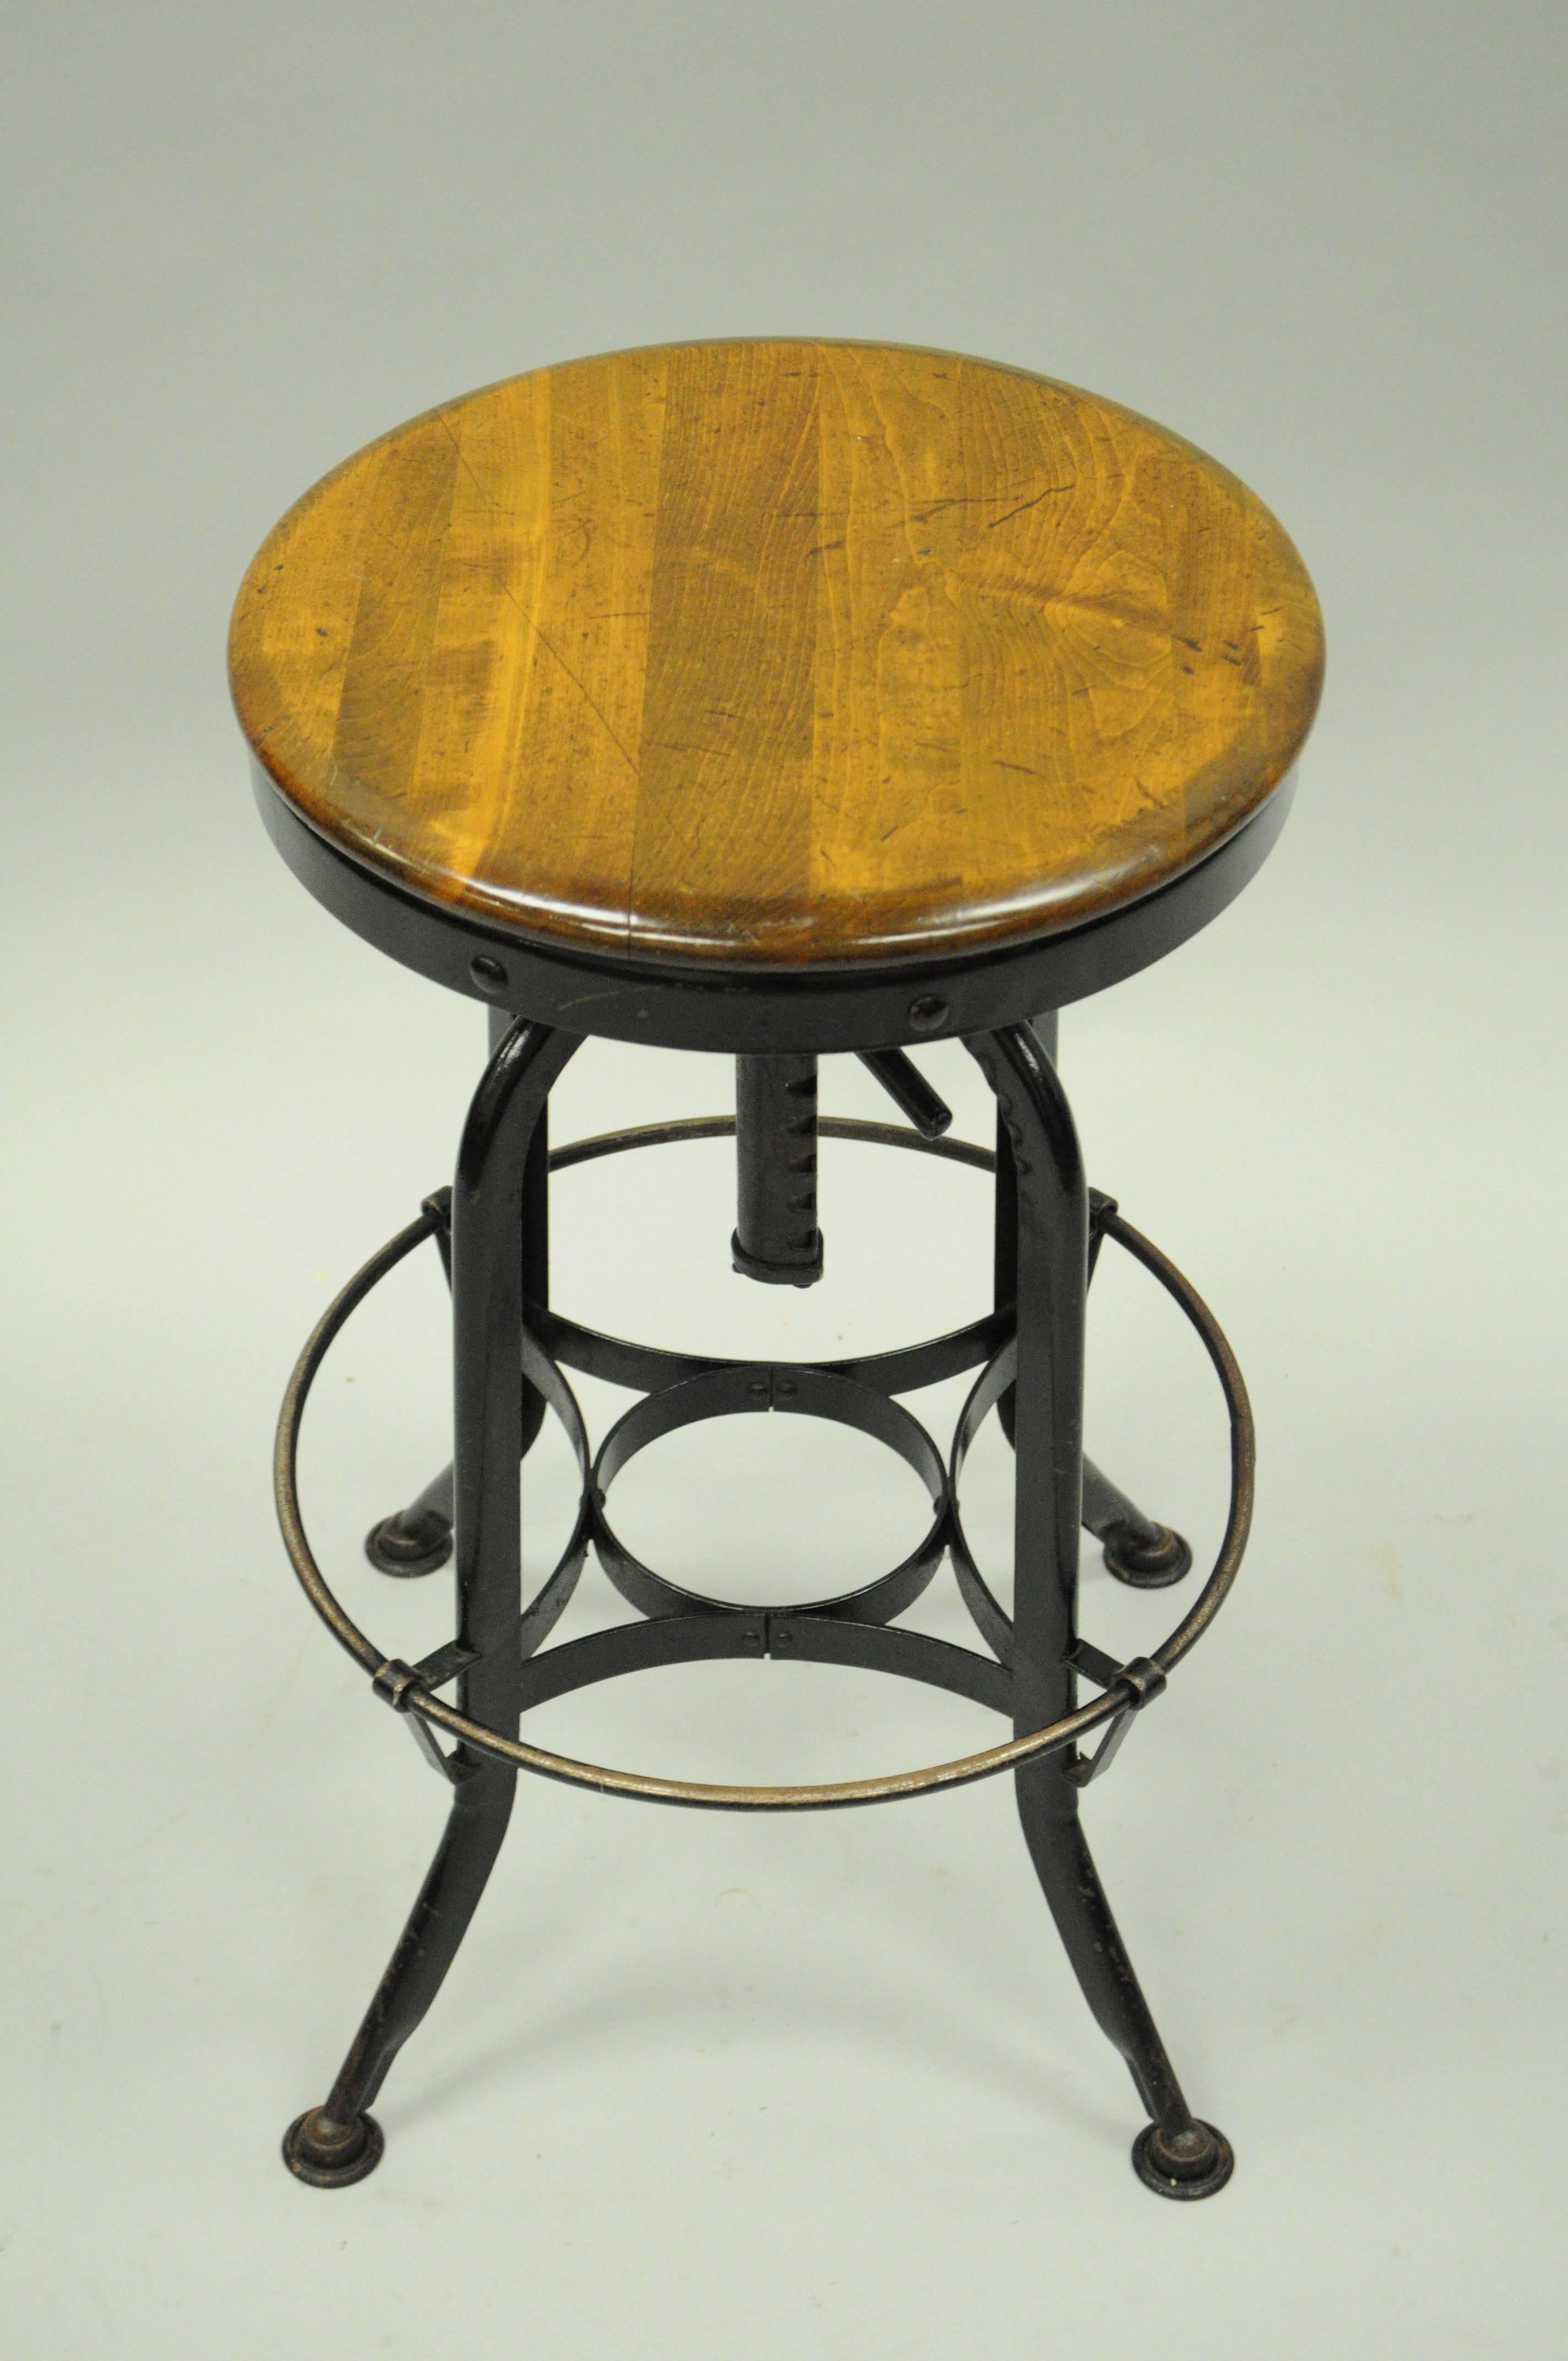 Vintage adjustable wood and metal architect's / engineers draftsman stool by Defiance Sales Corp. Item features a solid wood round butcher block seat, steel adjustable base with footrest, and authentic Industrial form. Original label on the